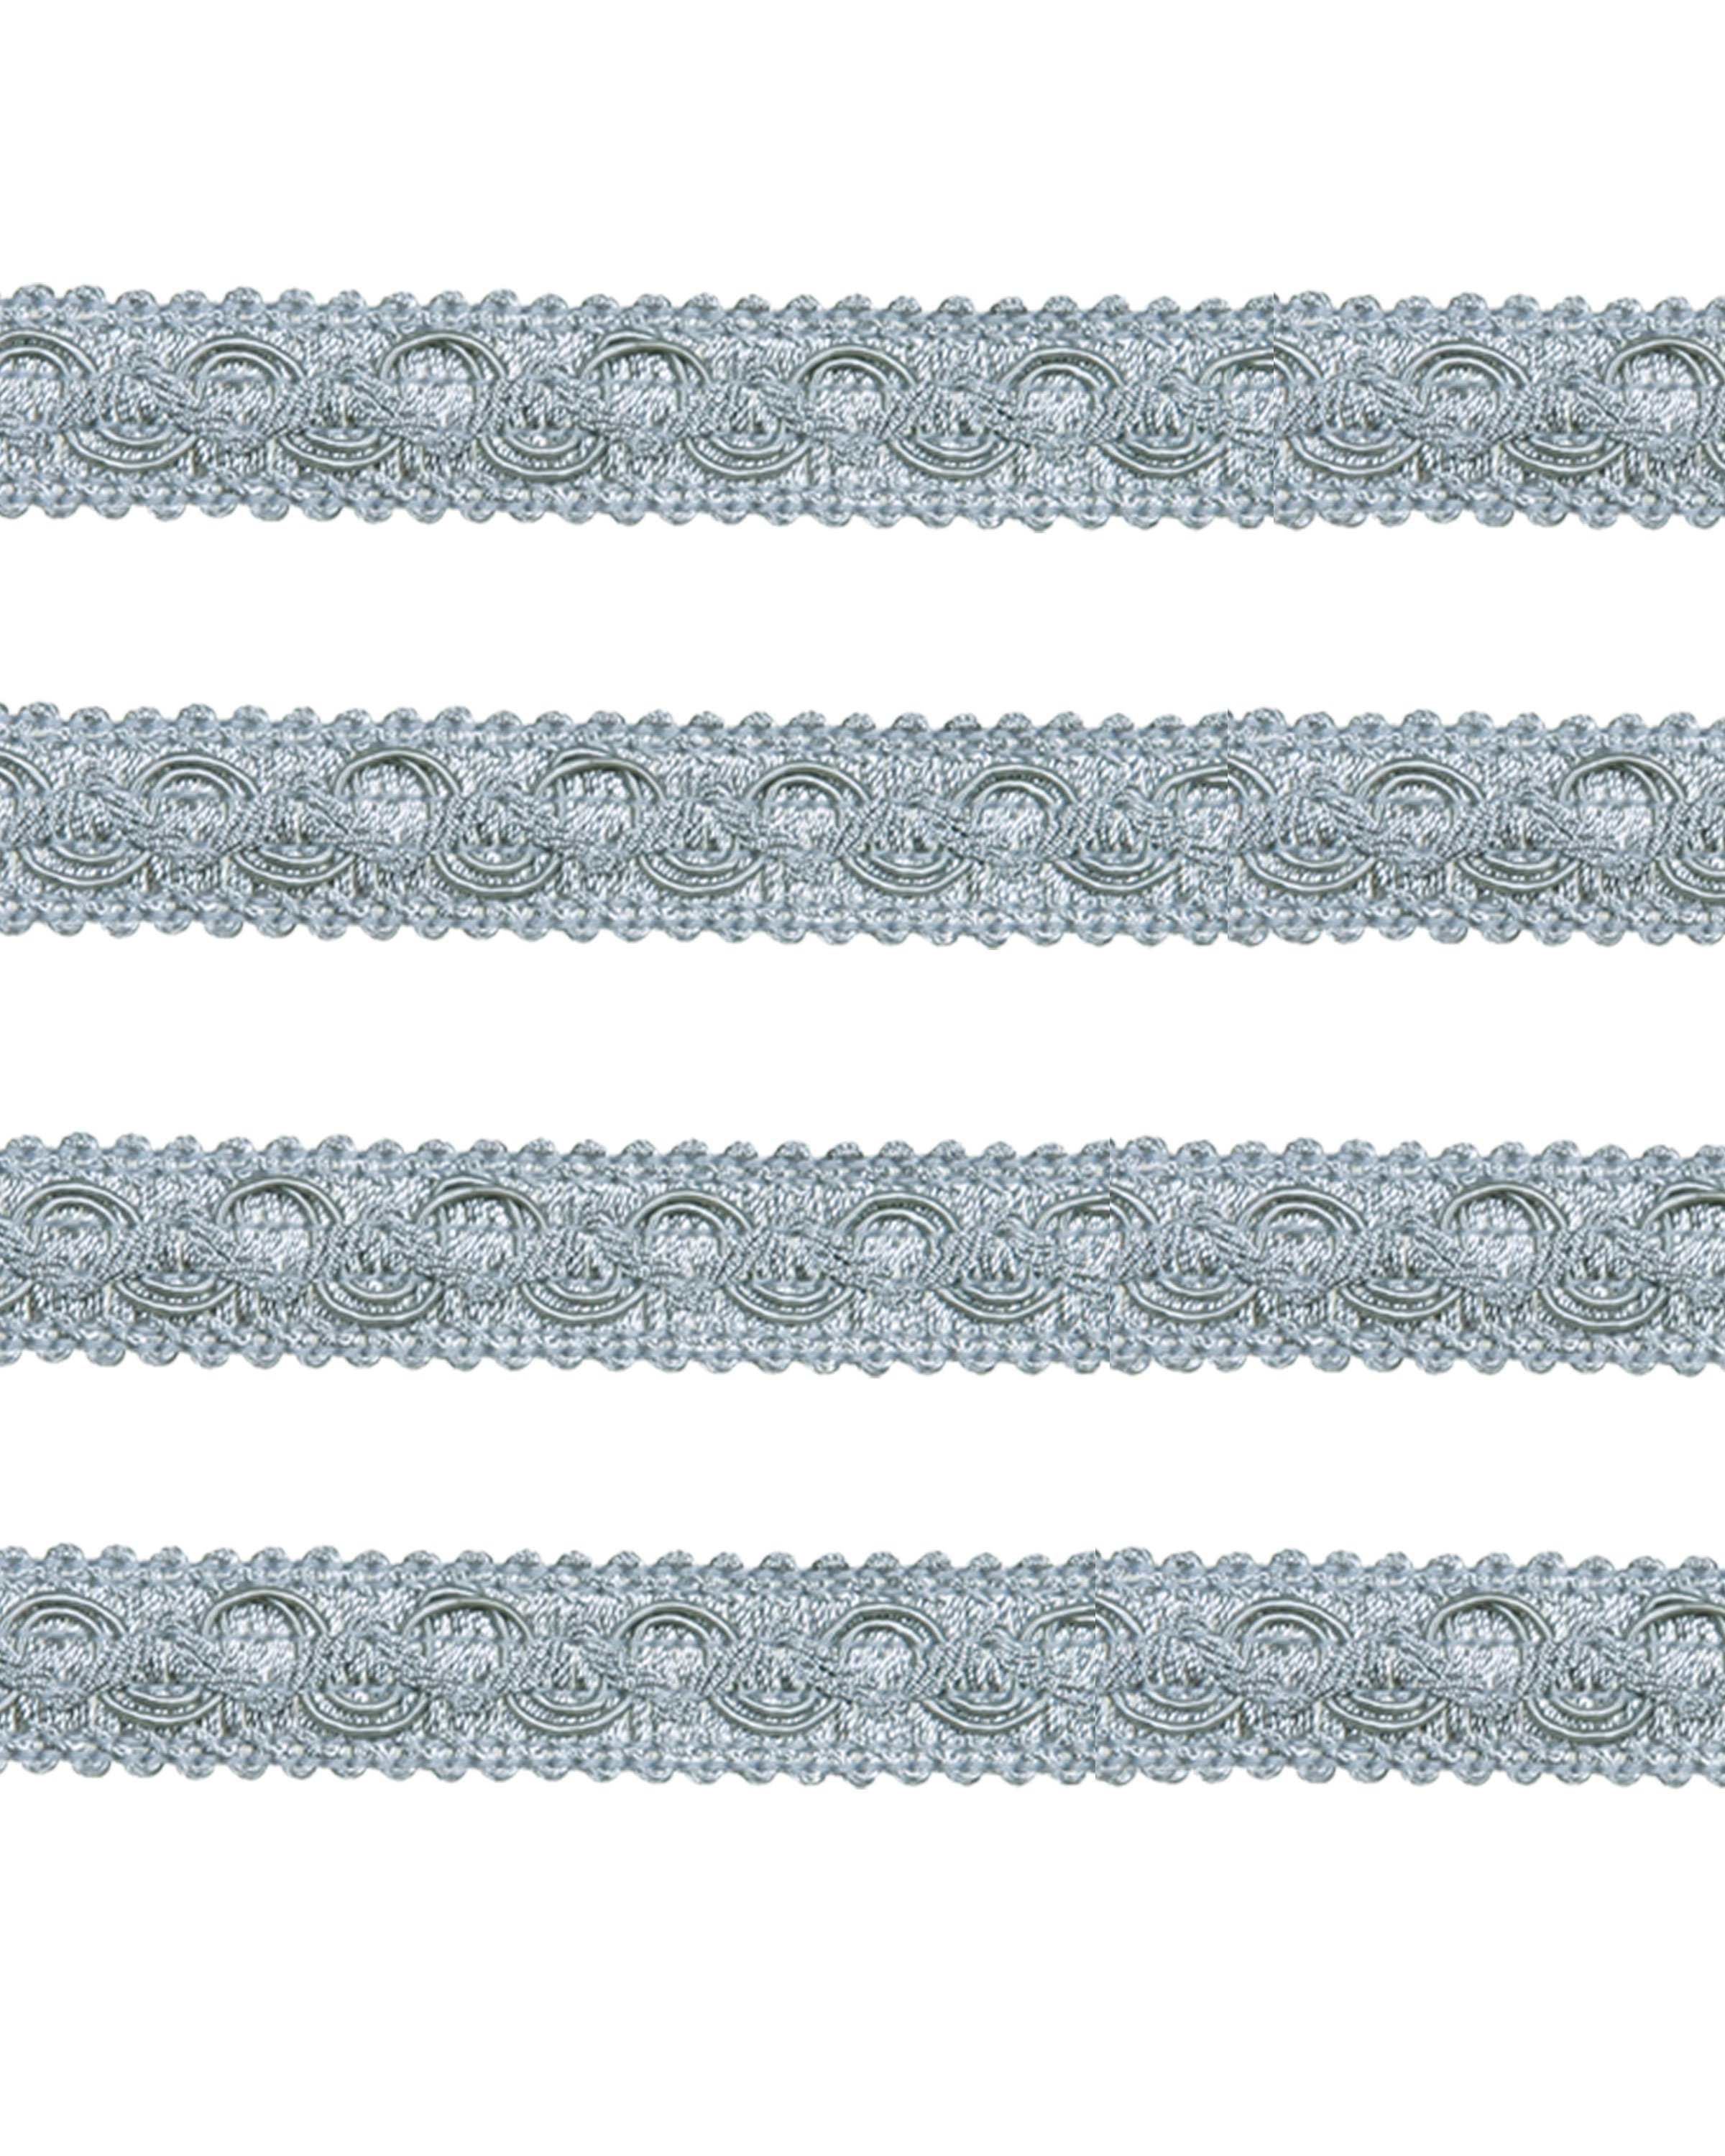 Ornate Braid - French Silver Blue 20mm Price is for 5 metres